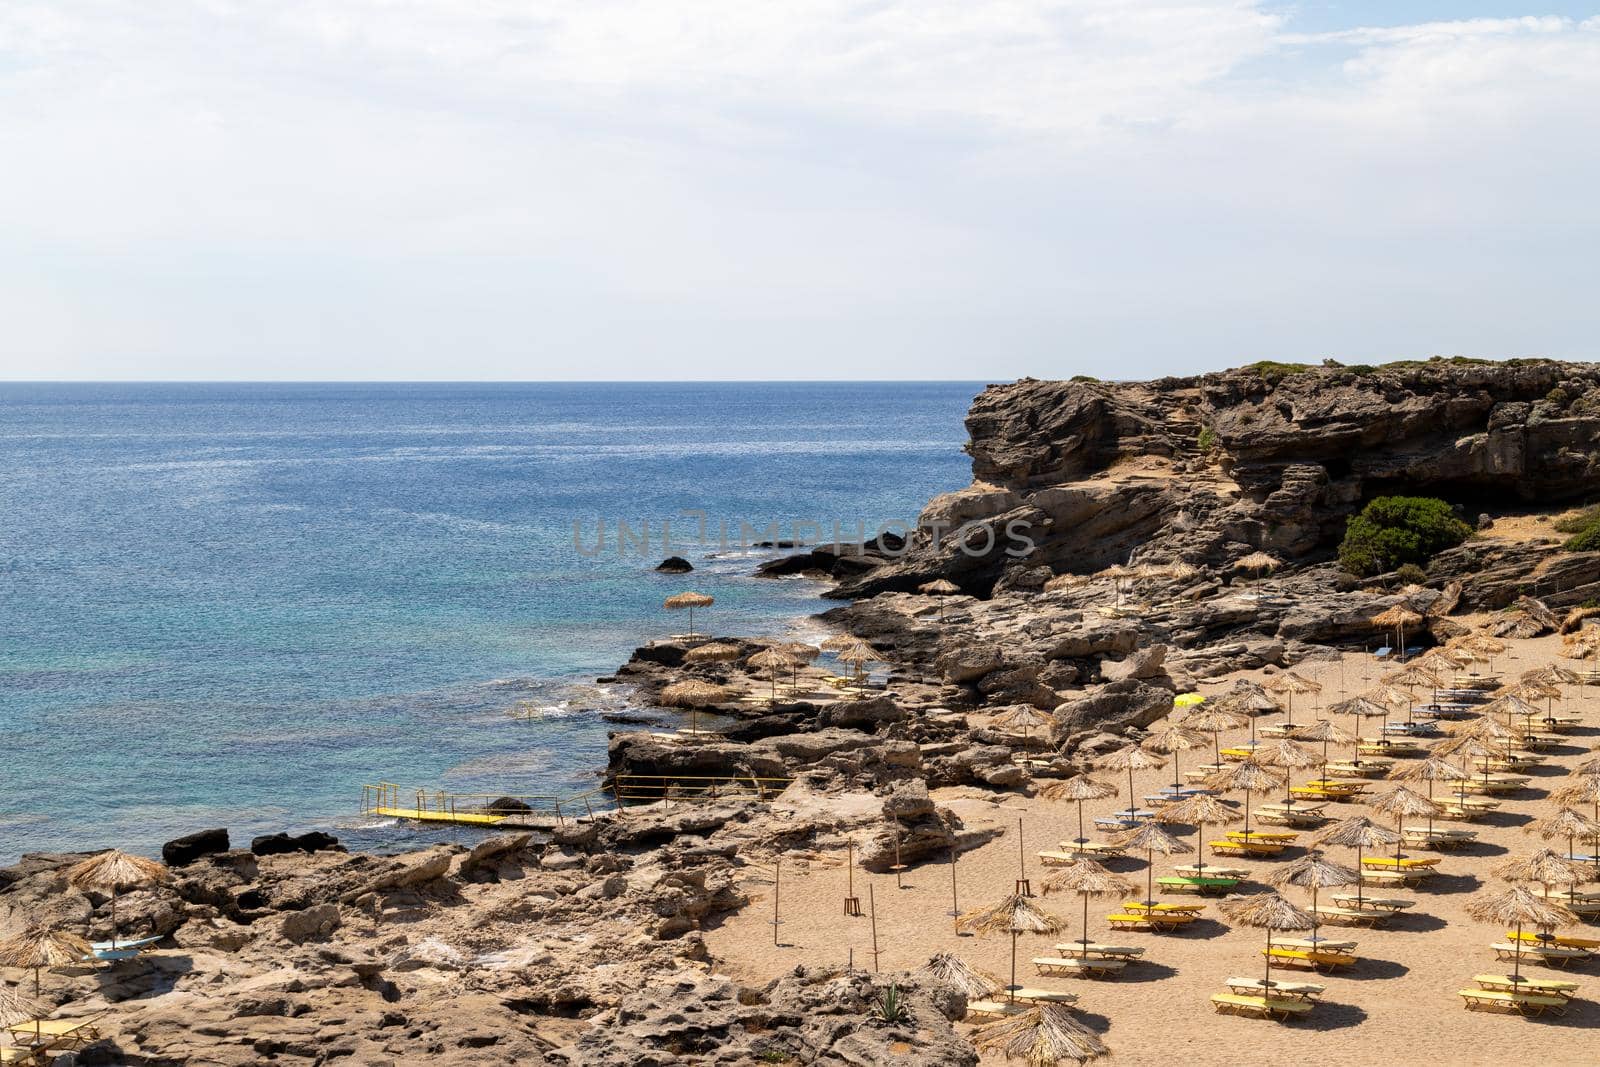 Scenic view at Stegna beach on Geek island Rhodes with rocks in the foreground and the mediterranean sea in the background  by reinerc